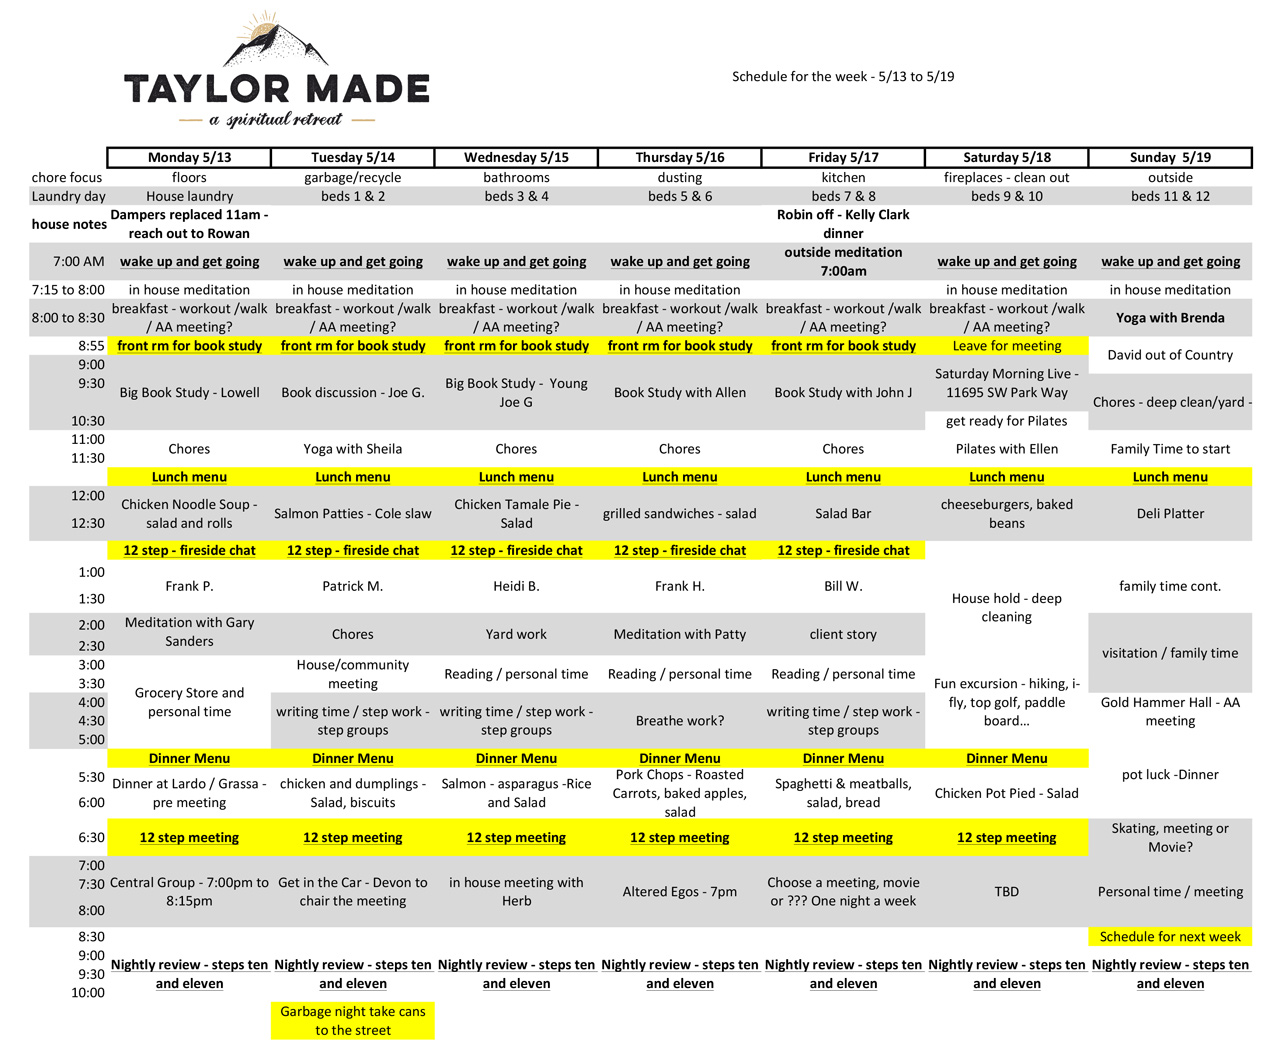 Taylor Made Retreat schedule sample